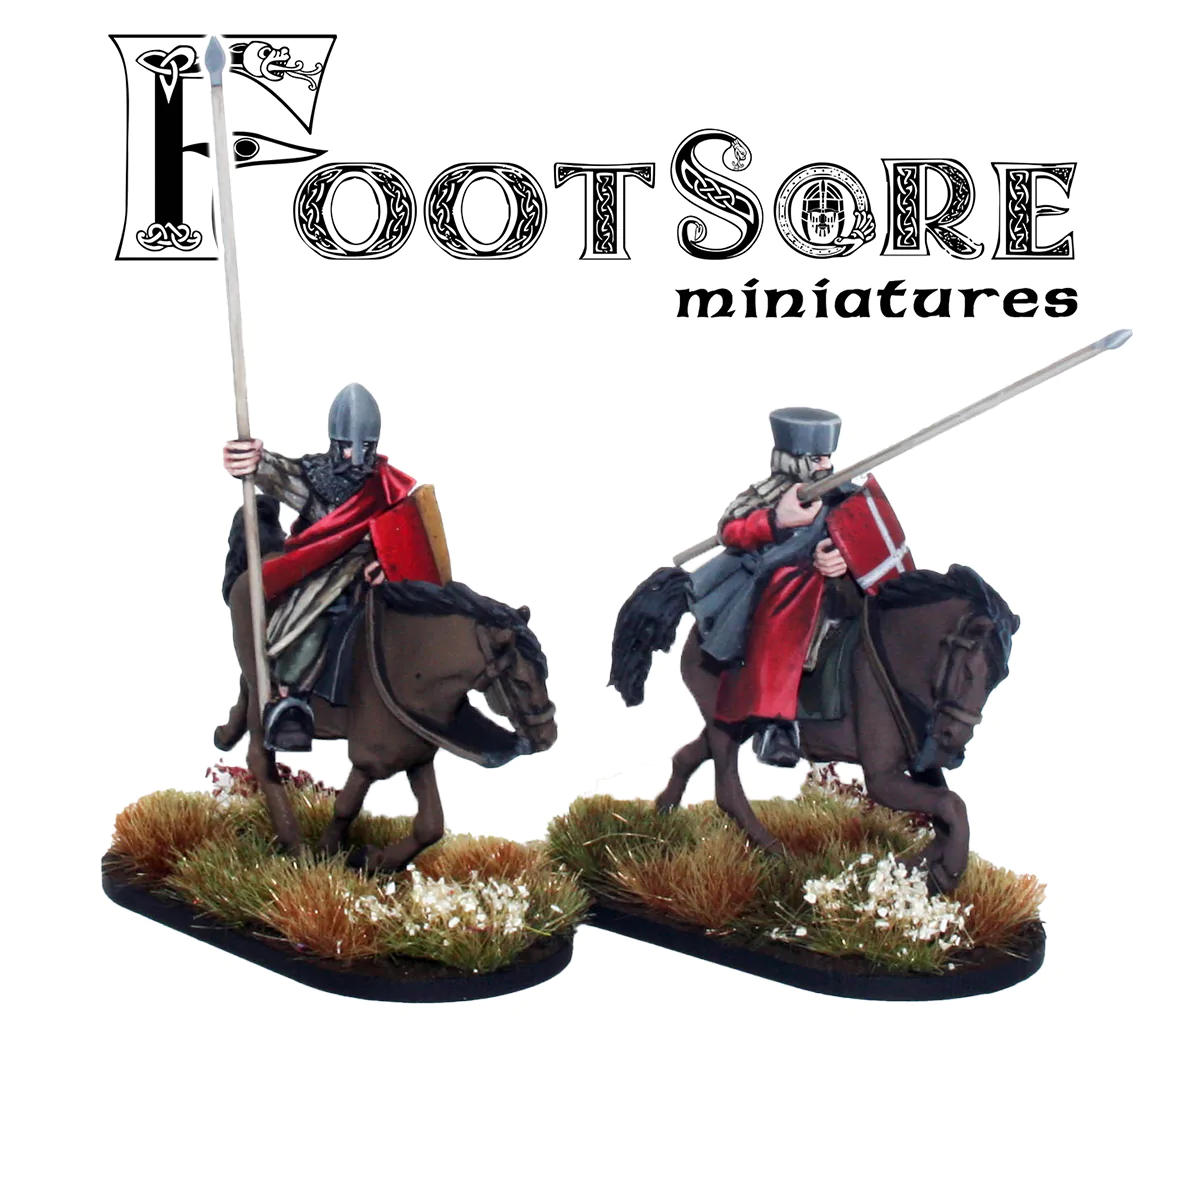 Footsore Miniatures WLS205 Welsh Medieval Cavalry with Lances